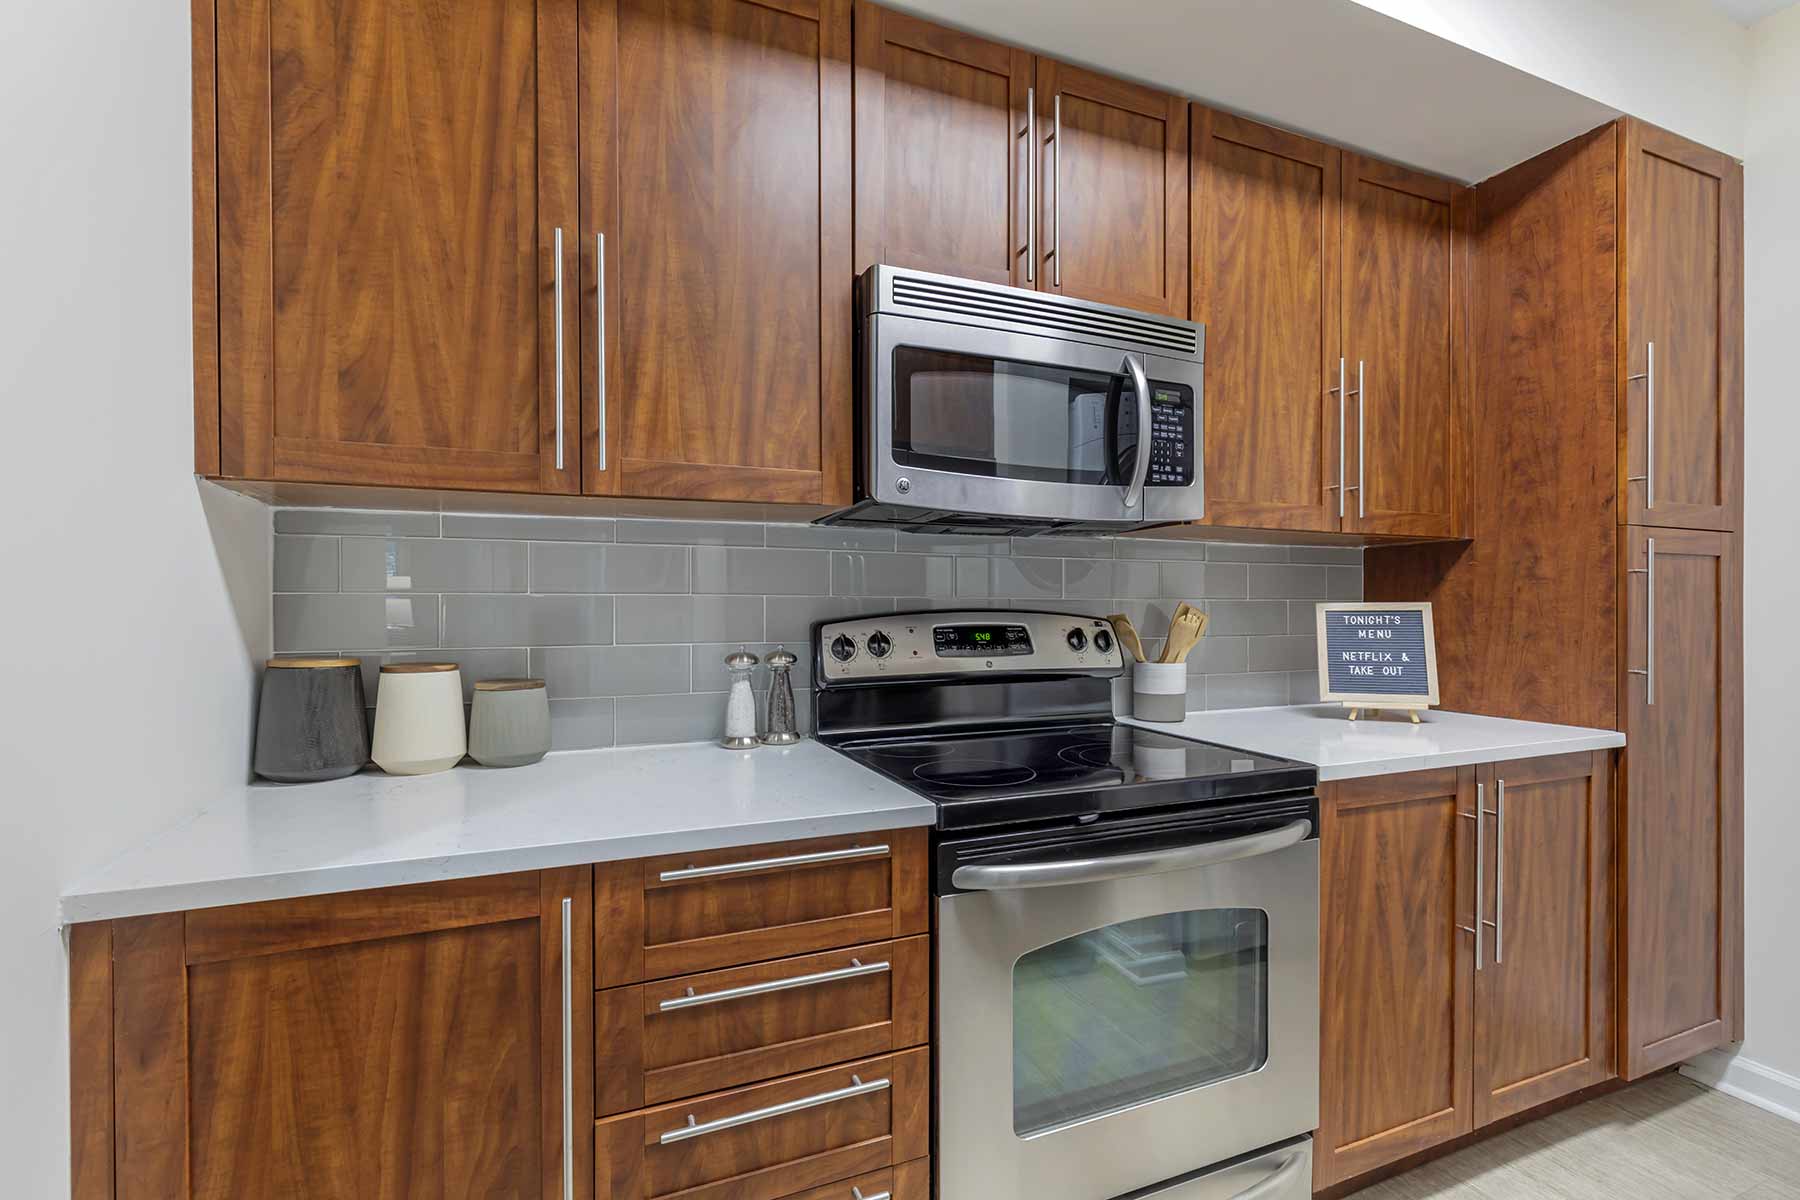 Kitchen with stainless steel appliances, white counters, and tile backsplash